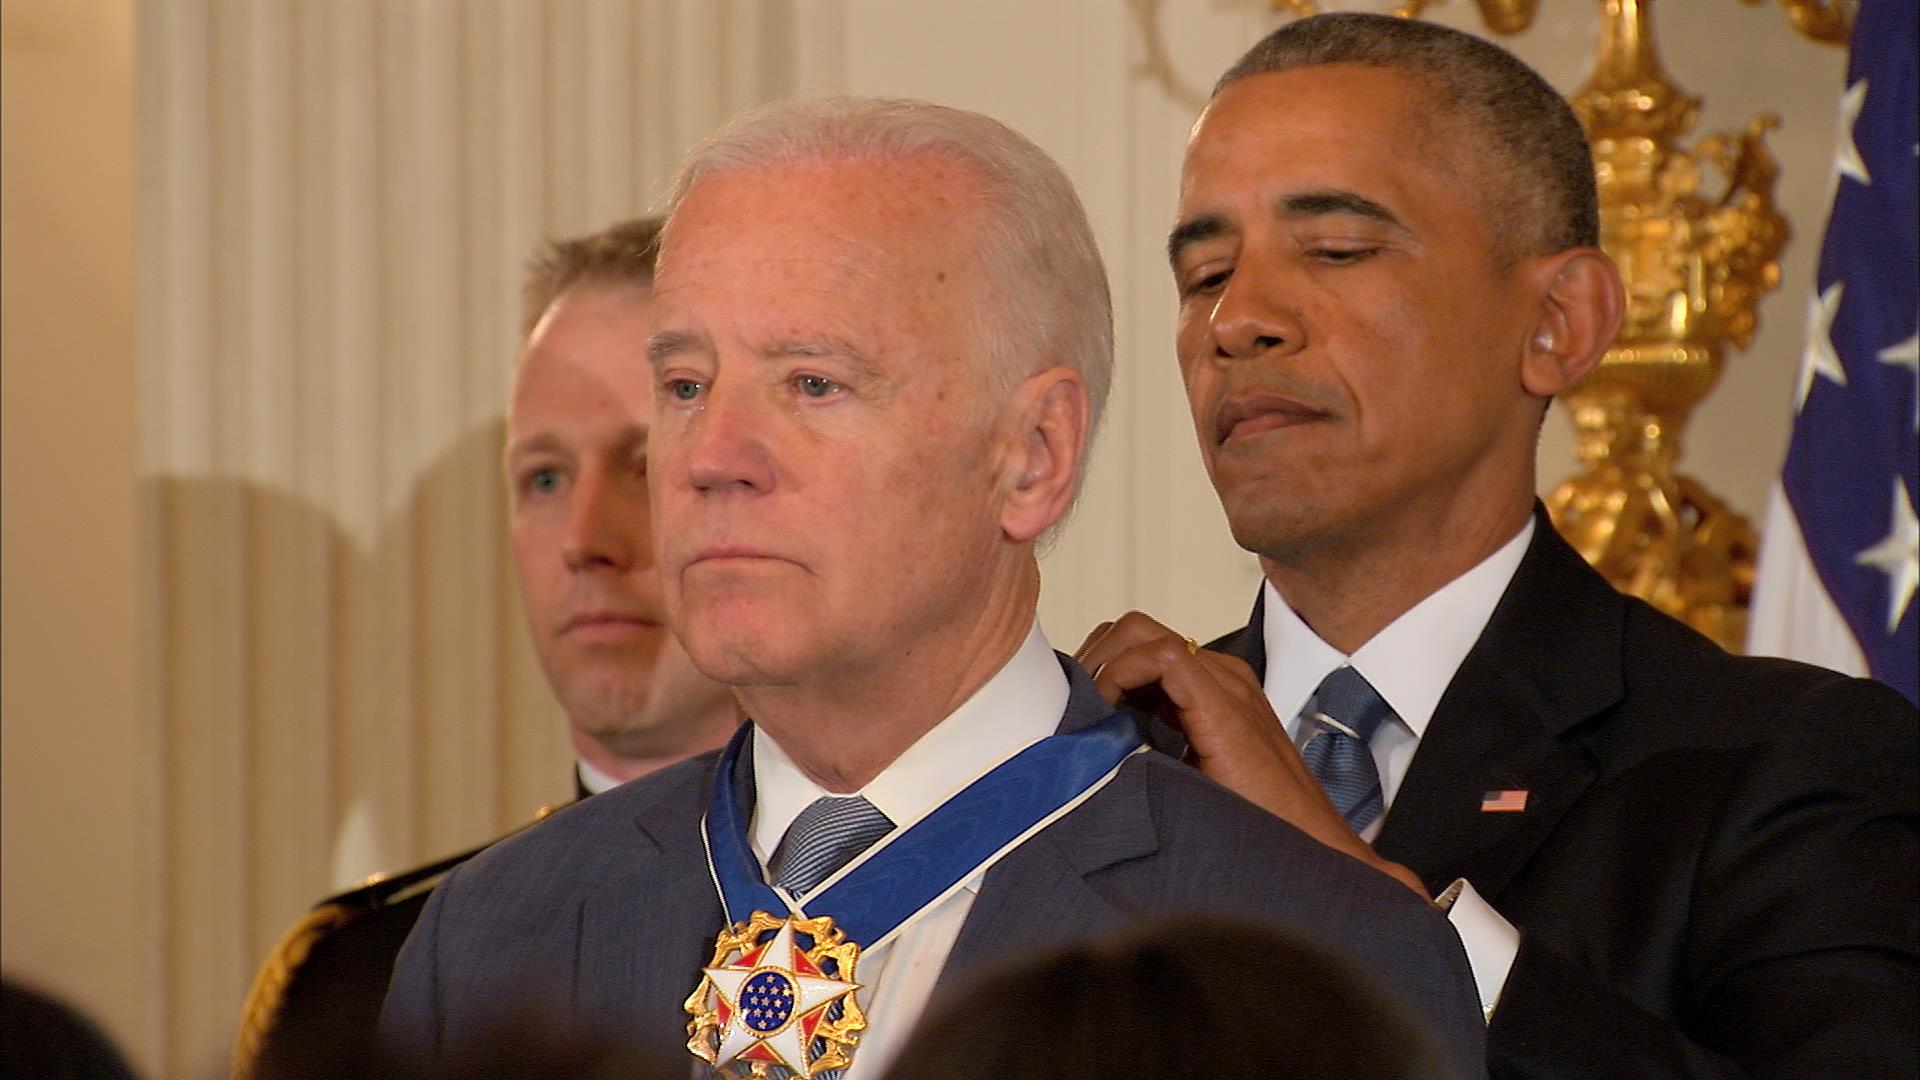 Joe Biden’s remarks after being surprised by President Obama with a ceremon...